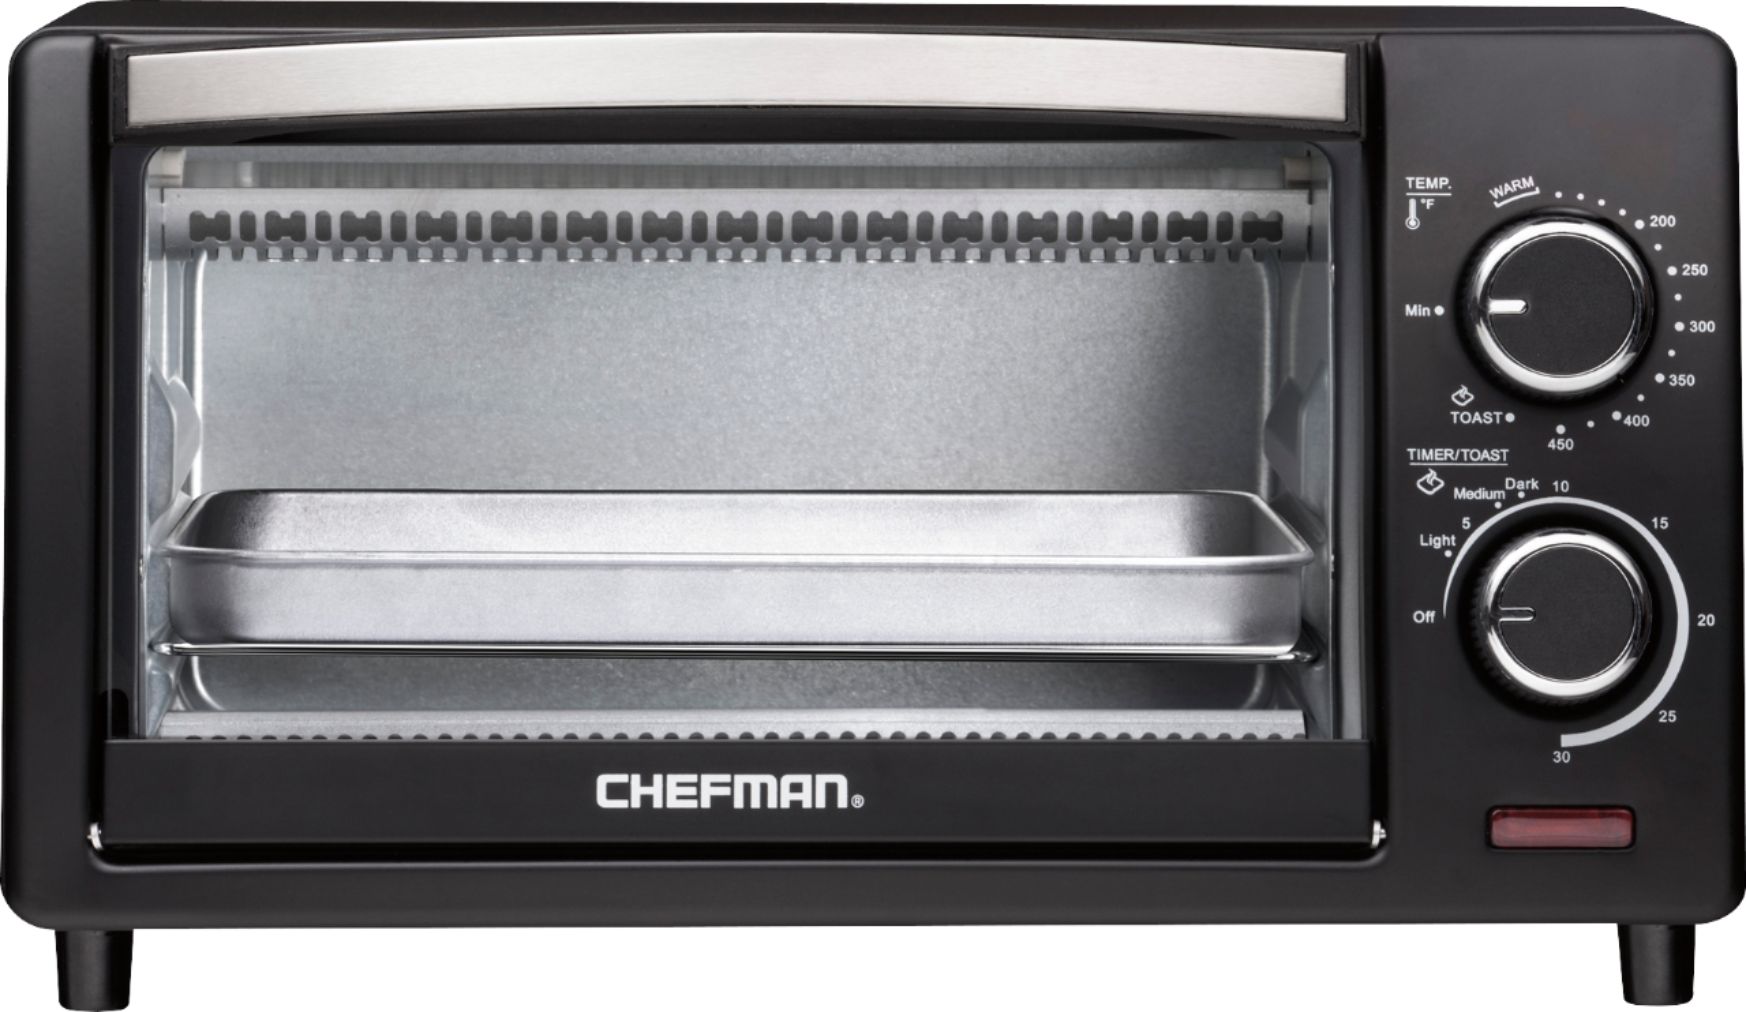 Tafole 1000-Watts 4-Slice Black Stainless Steel Toaster Oven and Pizza  Maker with Removable Crumb Tray and Wire Rack PYHD-8205 - The Home Depot